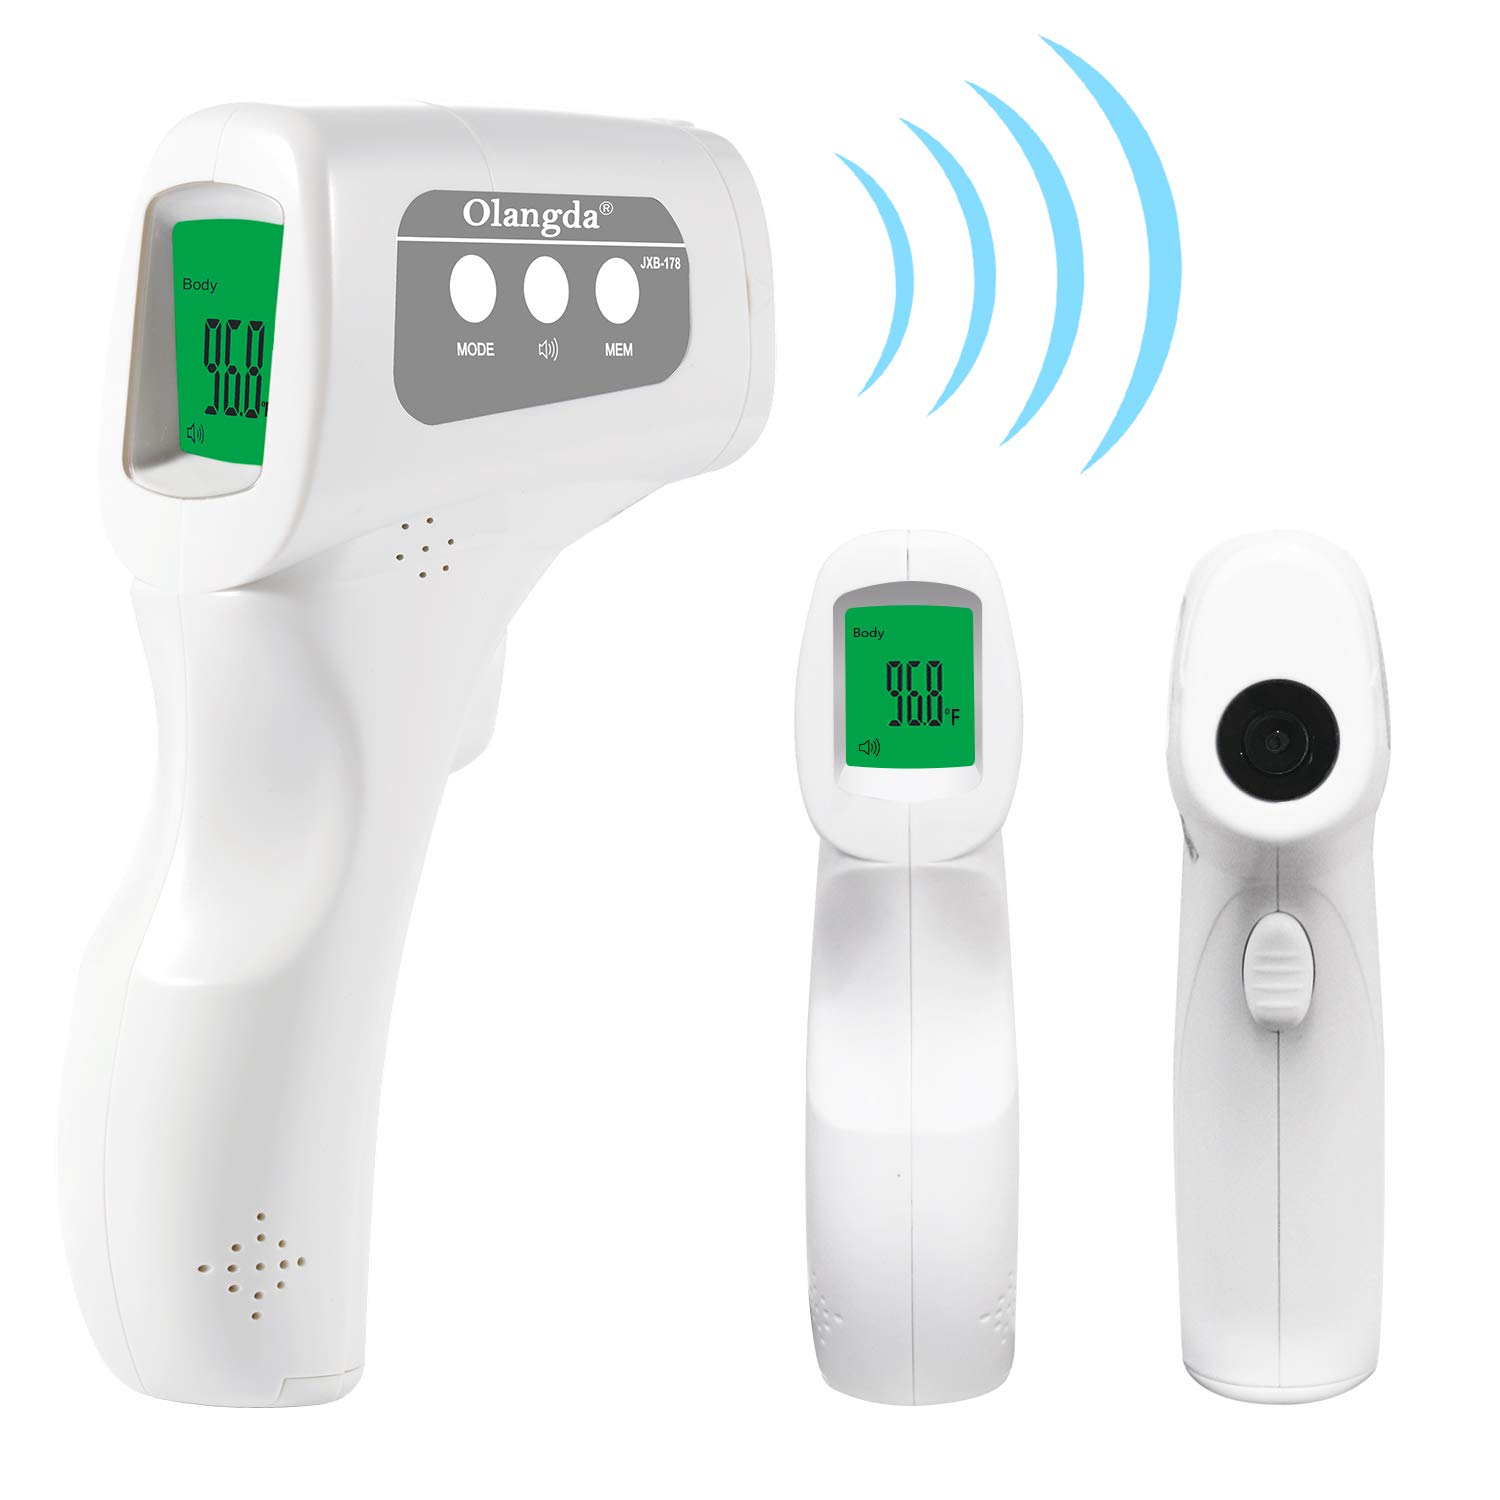 OLANGDA No-Touch Forehead Thermometer for Adults, Body Thermometer and Surface Thermometer 2 in 1, Digital Infrared Thermometer for Anyone with Accurate LCD Display